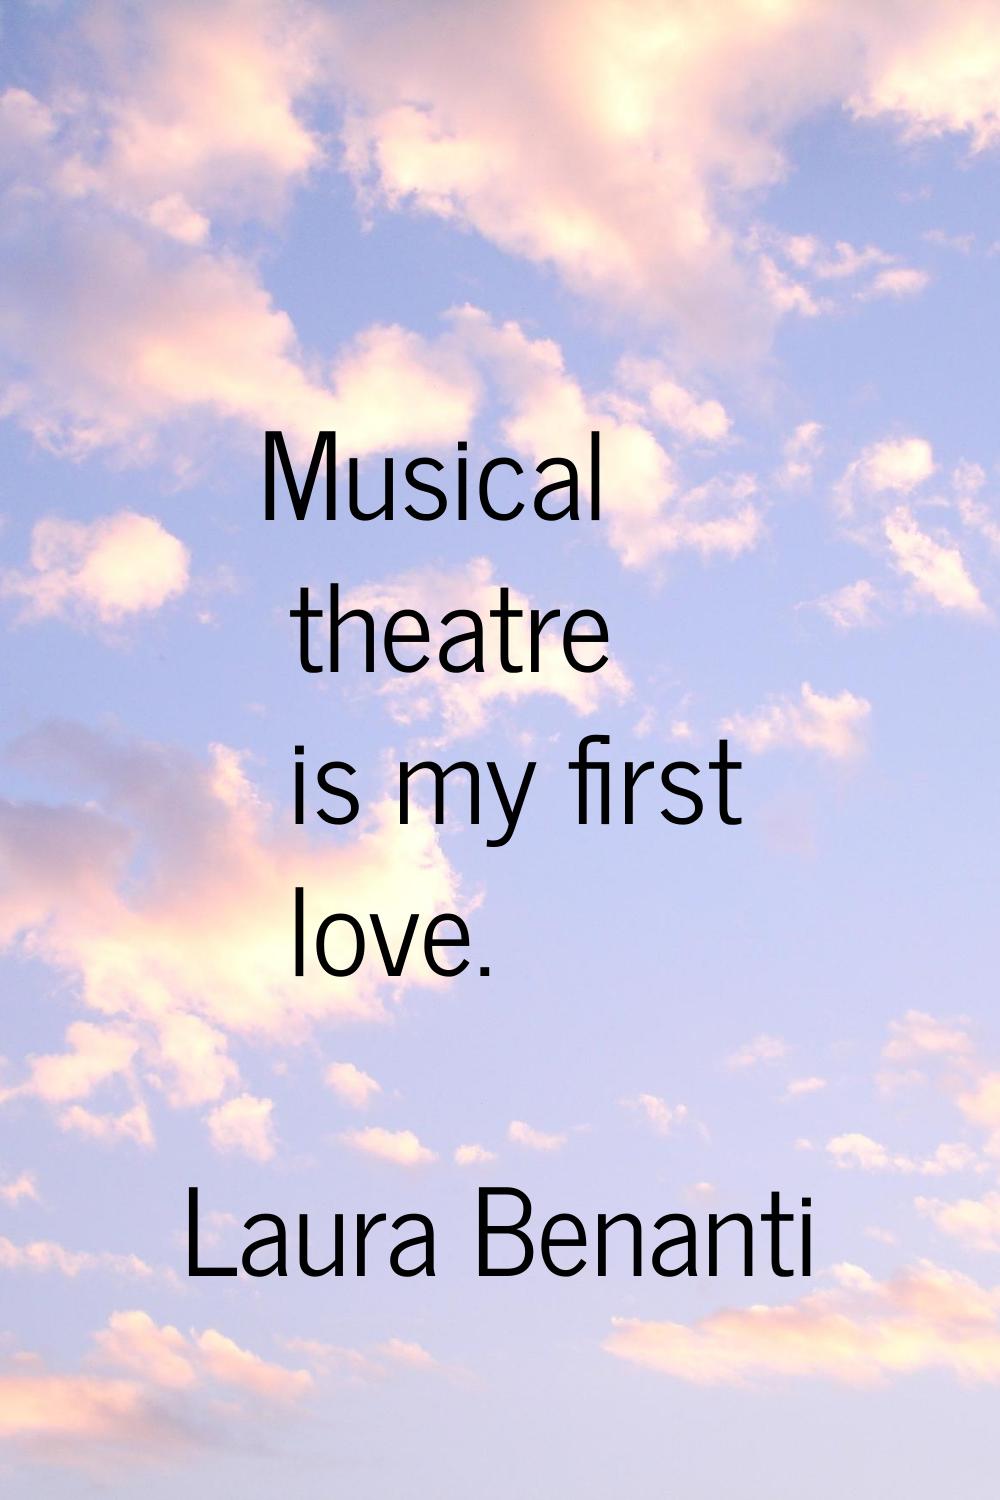 Musical theatre is my first love.